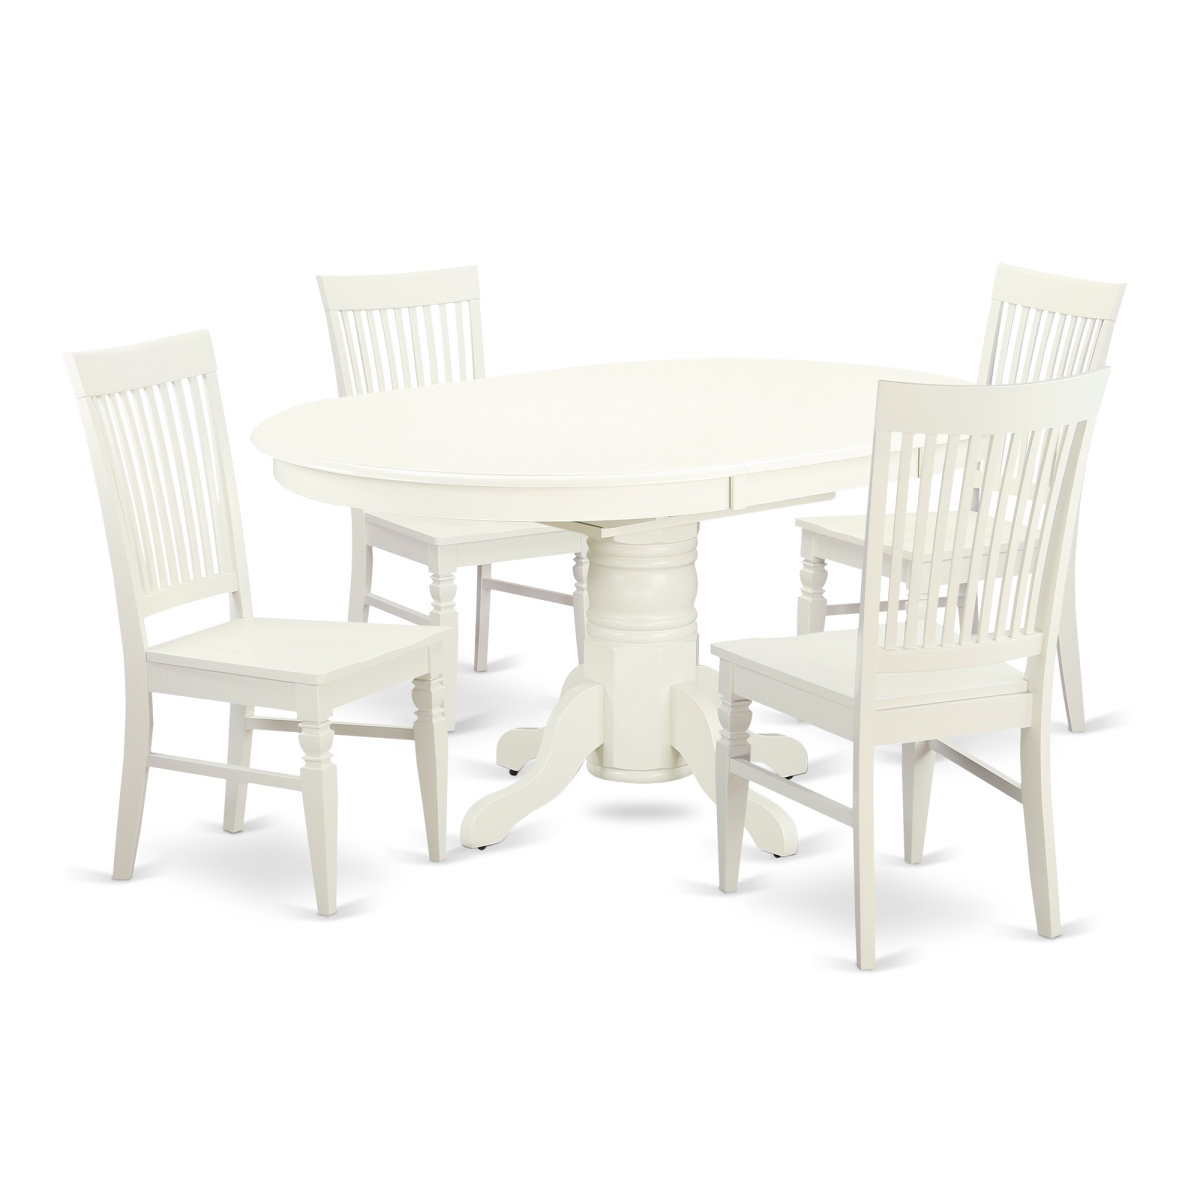 Picture of East West Furniture AVWE5-LWH-W 5 Piece Dining Set, Linen White